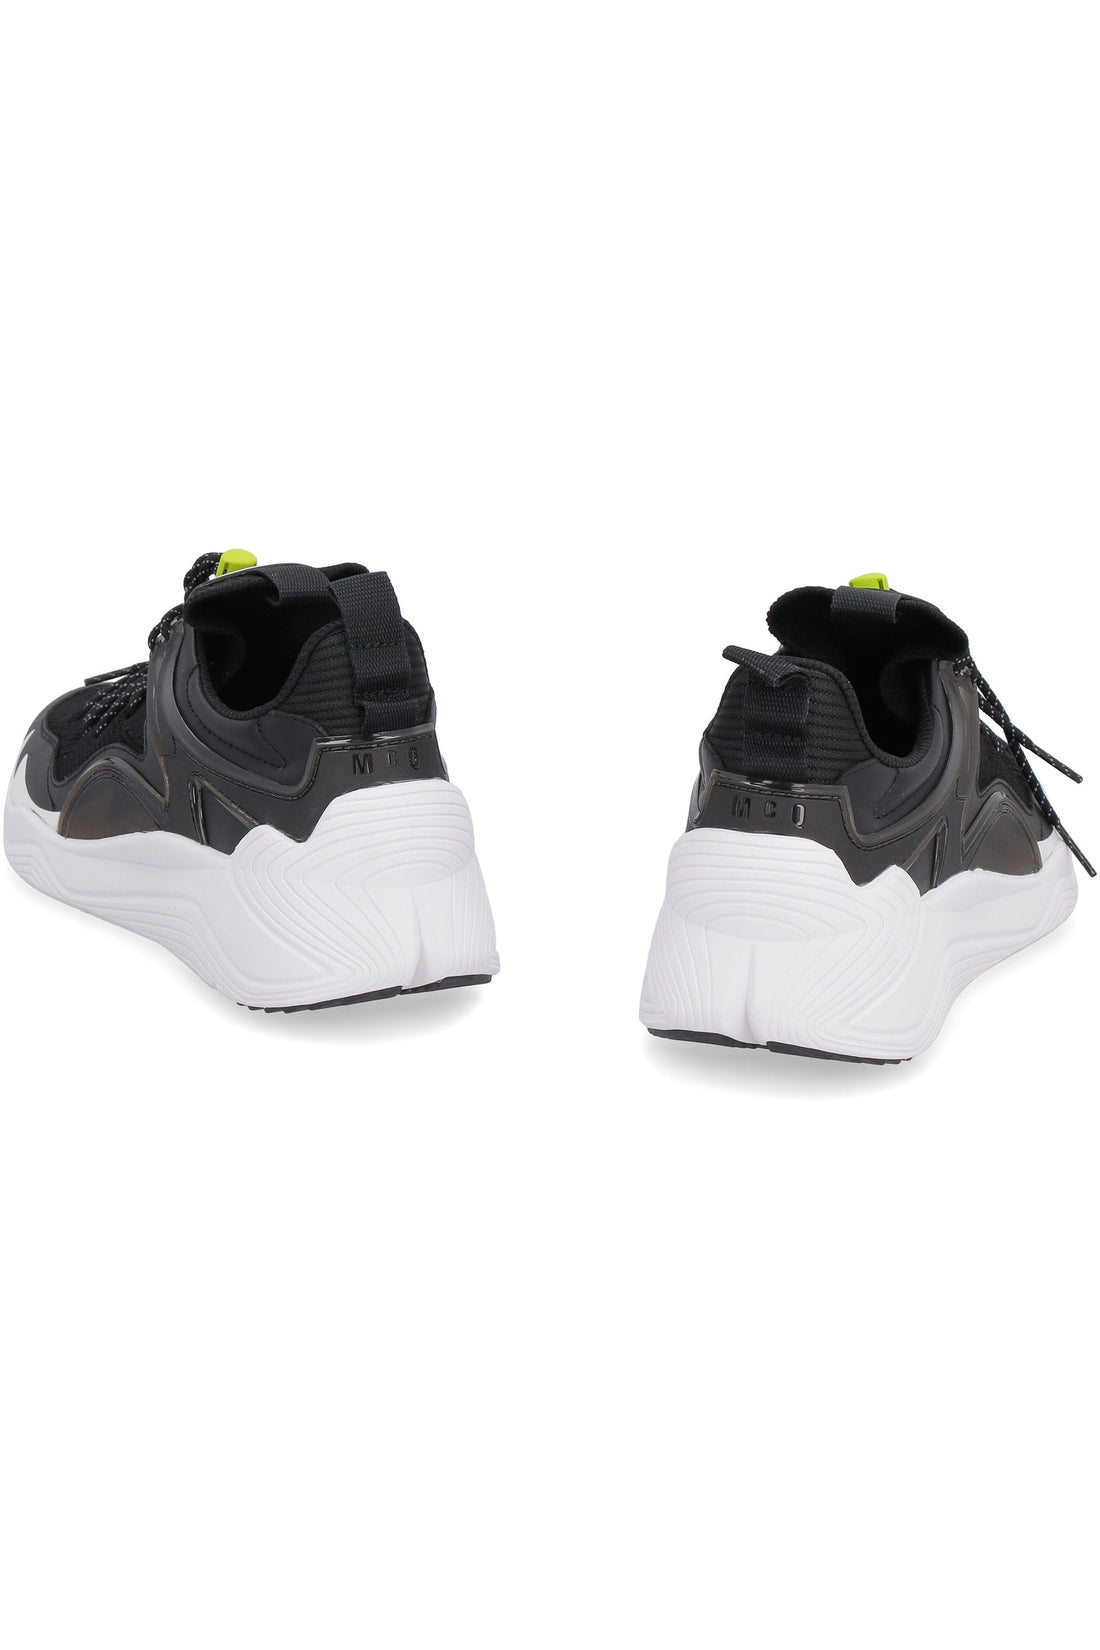 MCQ-OUTLET-SALE-Gishiki knitted sneakers-ARCHIVIST